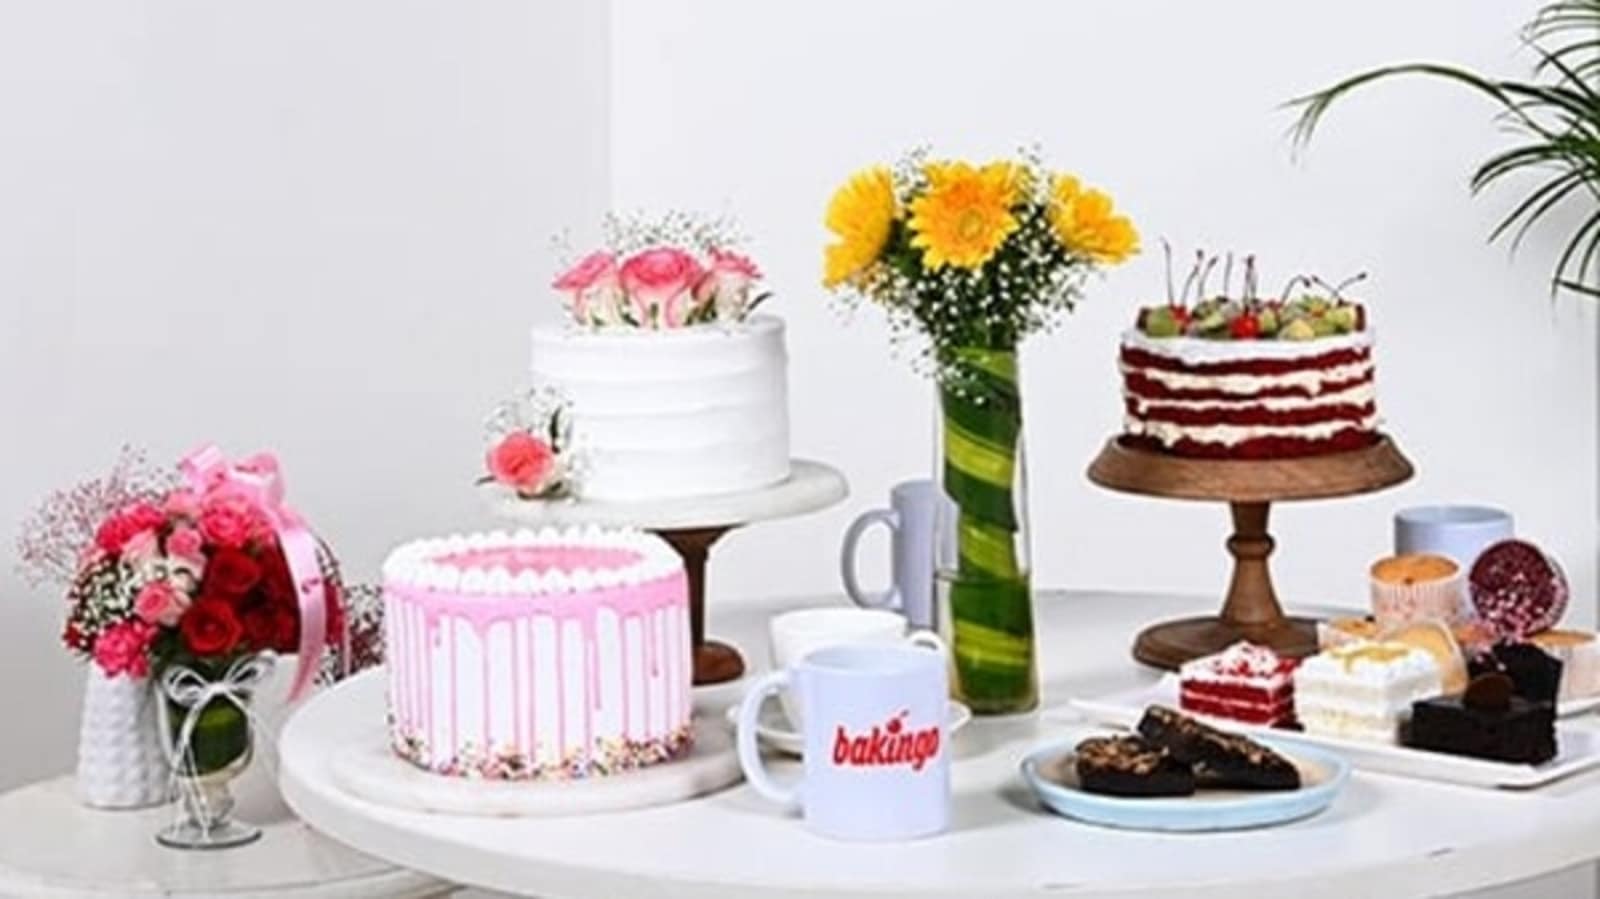 Create Moments of Love with Bakingo's Anniversary Cakes | Create Moments of  Love with Bakingo's Anniversary Cakes